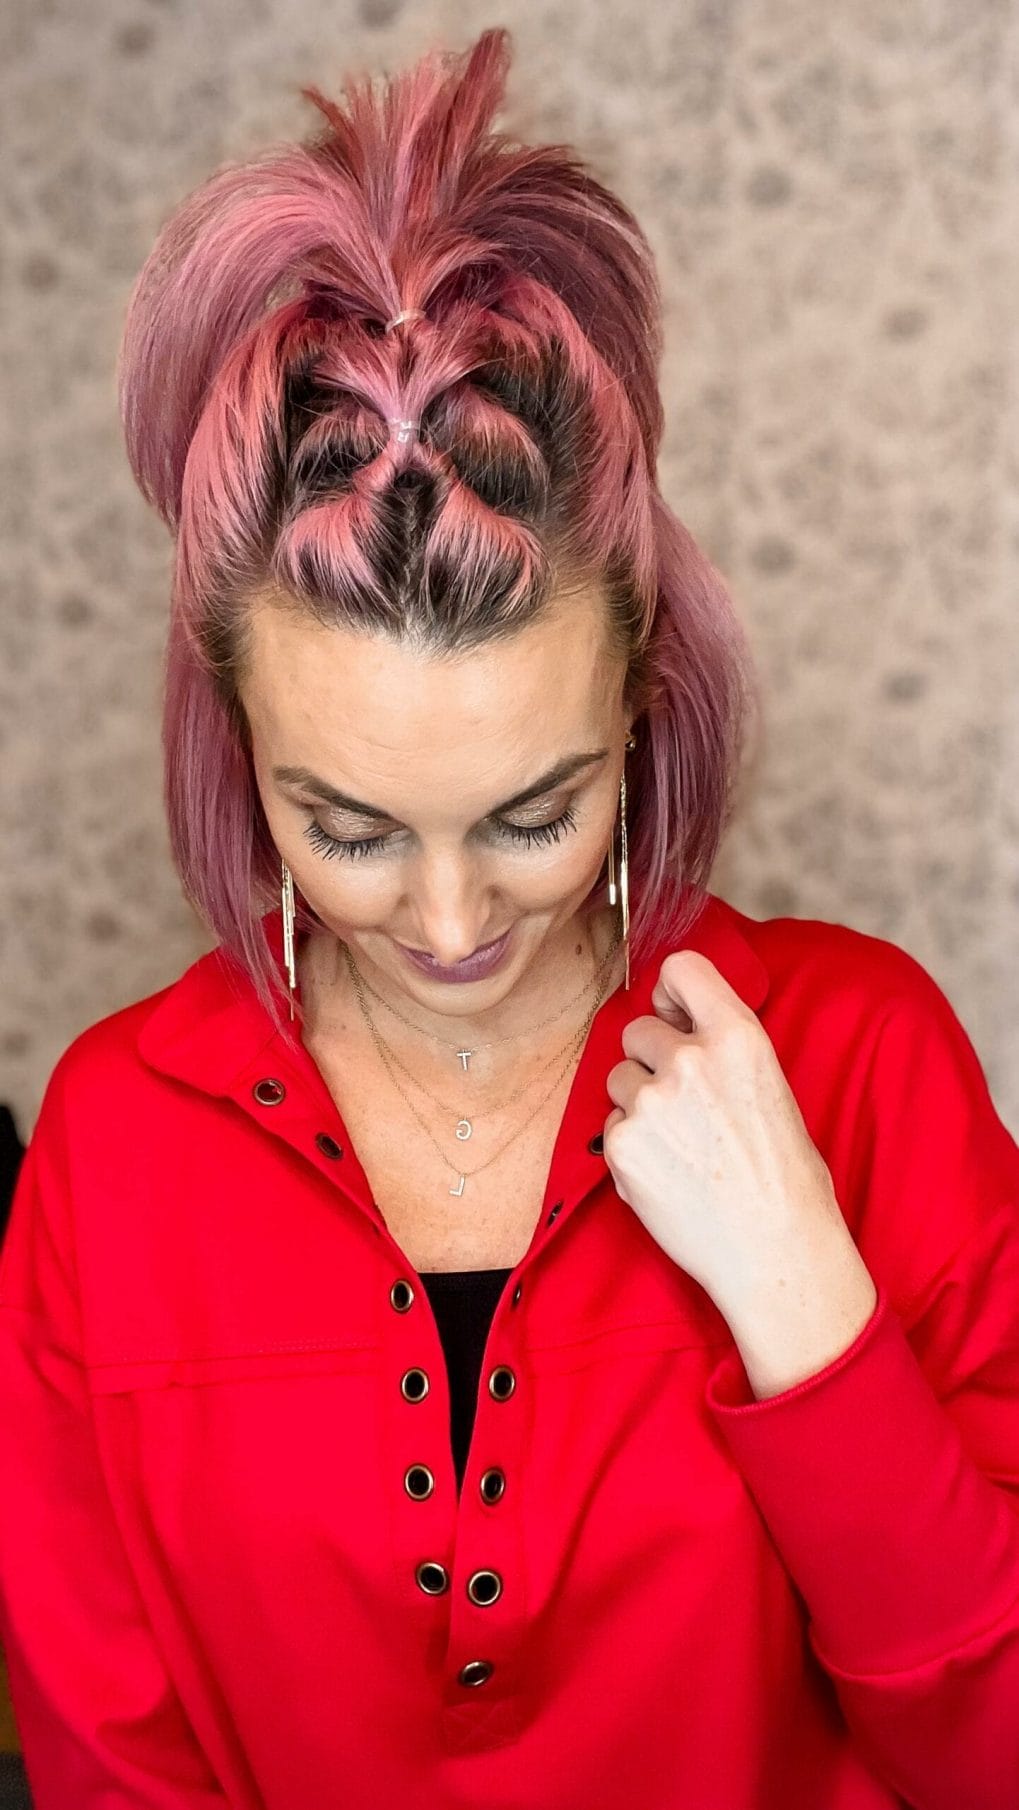 Bold pink topknot with heart design on the back, showing off personality at the gym